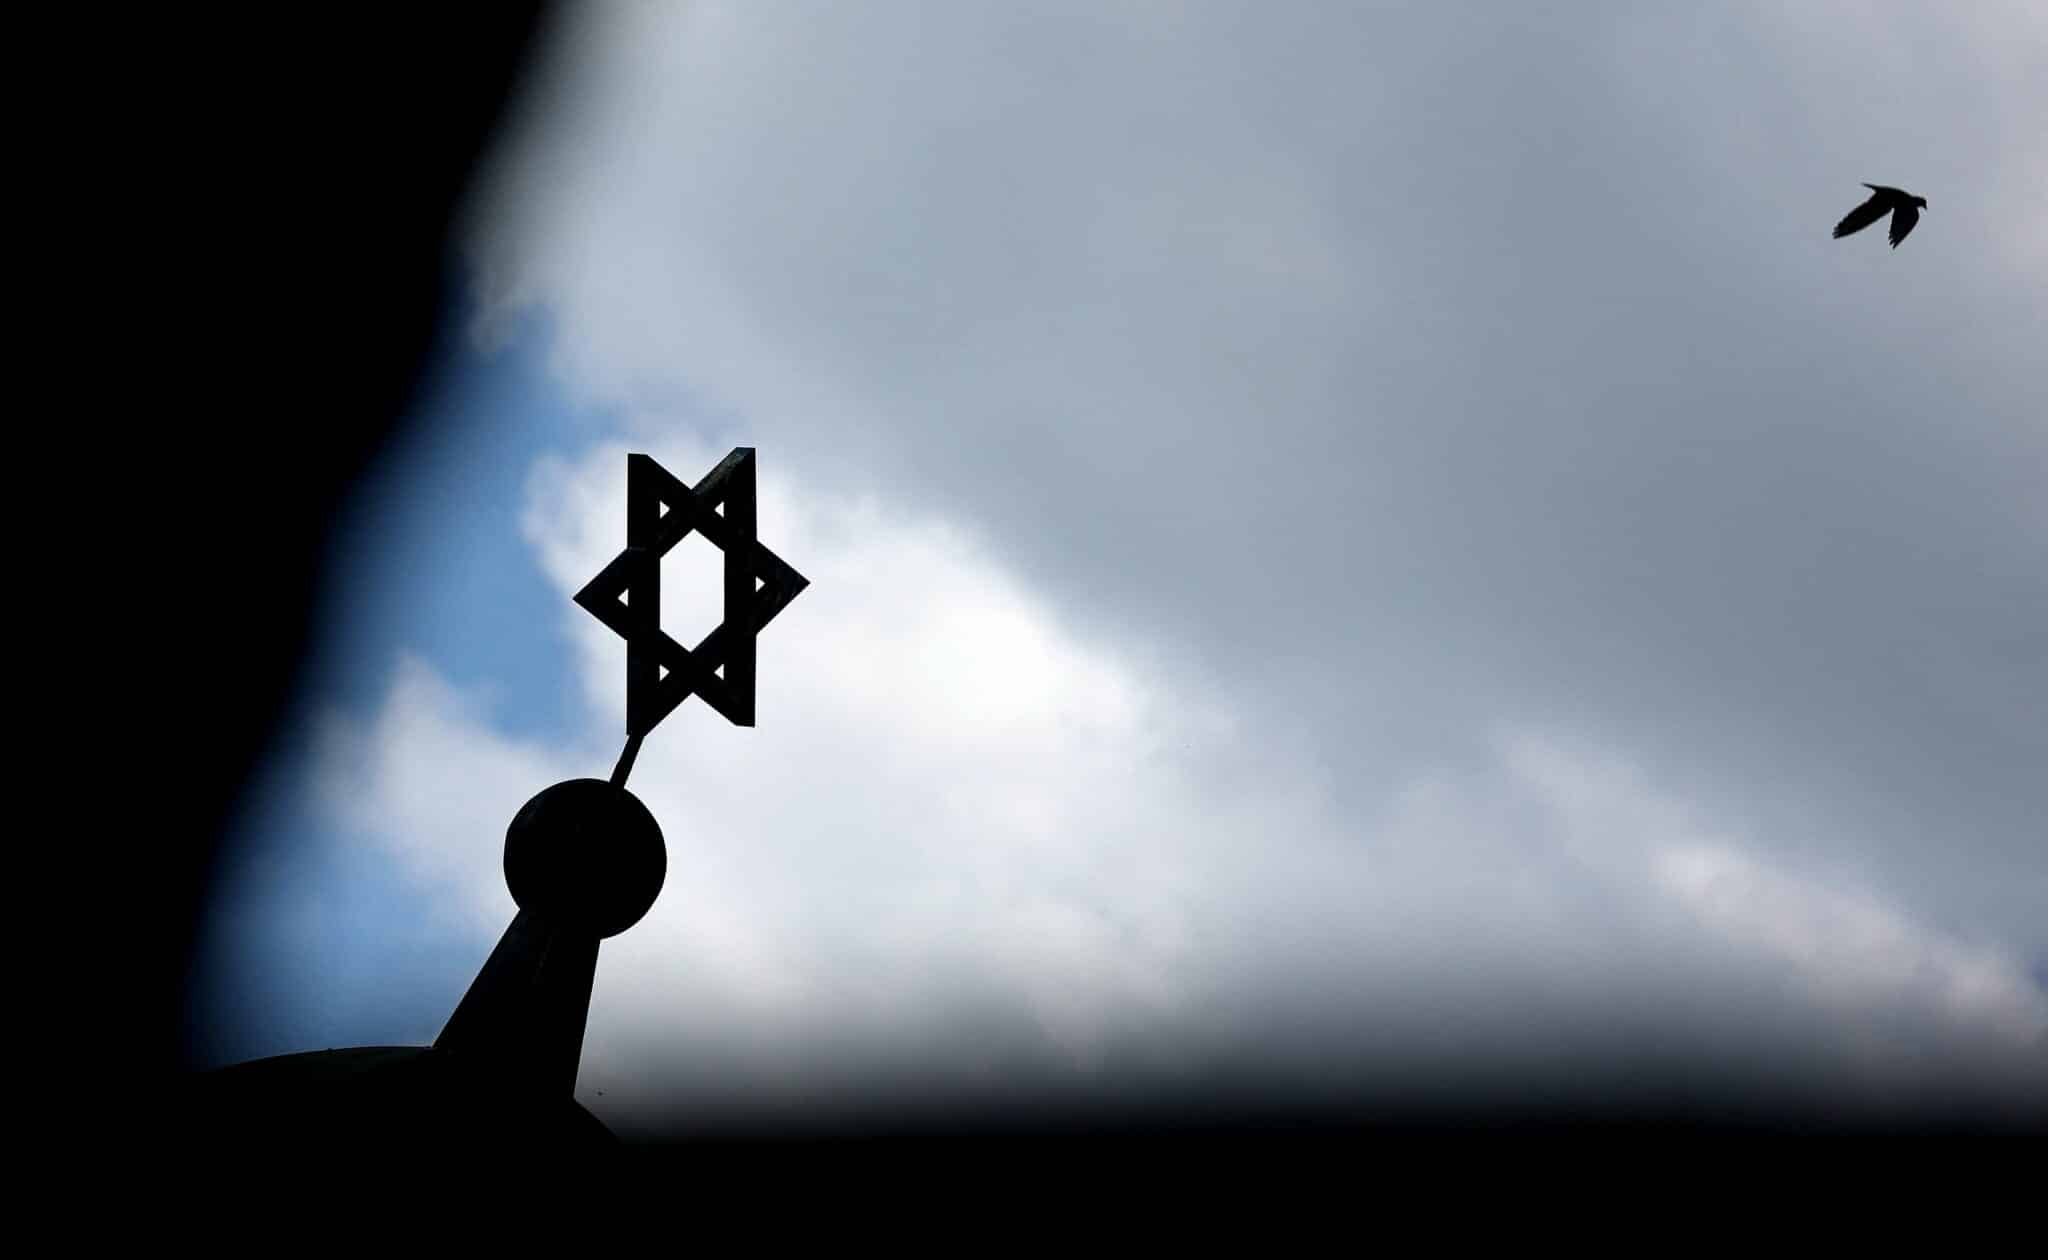 A bird flies past as the Star of David is seen on top of the synagogue in Halle, eastern Germany, on May 30, 2021. - In October 2019, Germany was rocked by a shooting at the synagogue in the eastern city of Halle that left two people dead. Neo-Nazi Stephan Balliet was sentenced to life in prison in December for that attack, described as the country's worst anti-Semitic atrocity since World War II. Balliet, heavily armed, tried to storm the synagogue, but when the door failed to break down he shot dead a female passer-by and a man at a kebab shop instead. (Photo by Ronny Hartmann / AFP) (Photo by RONNY HARTMANN/AFP via Getty Images)